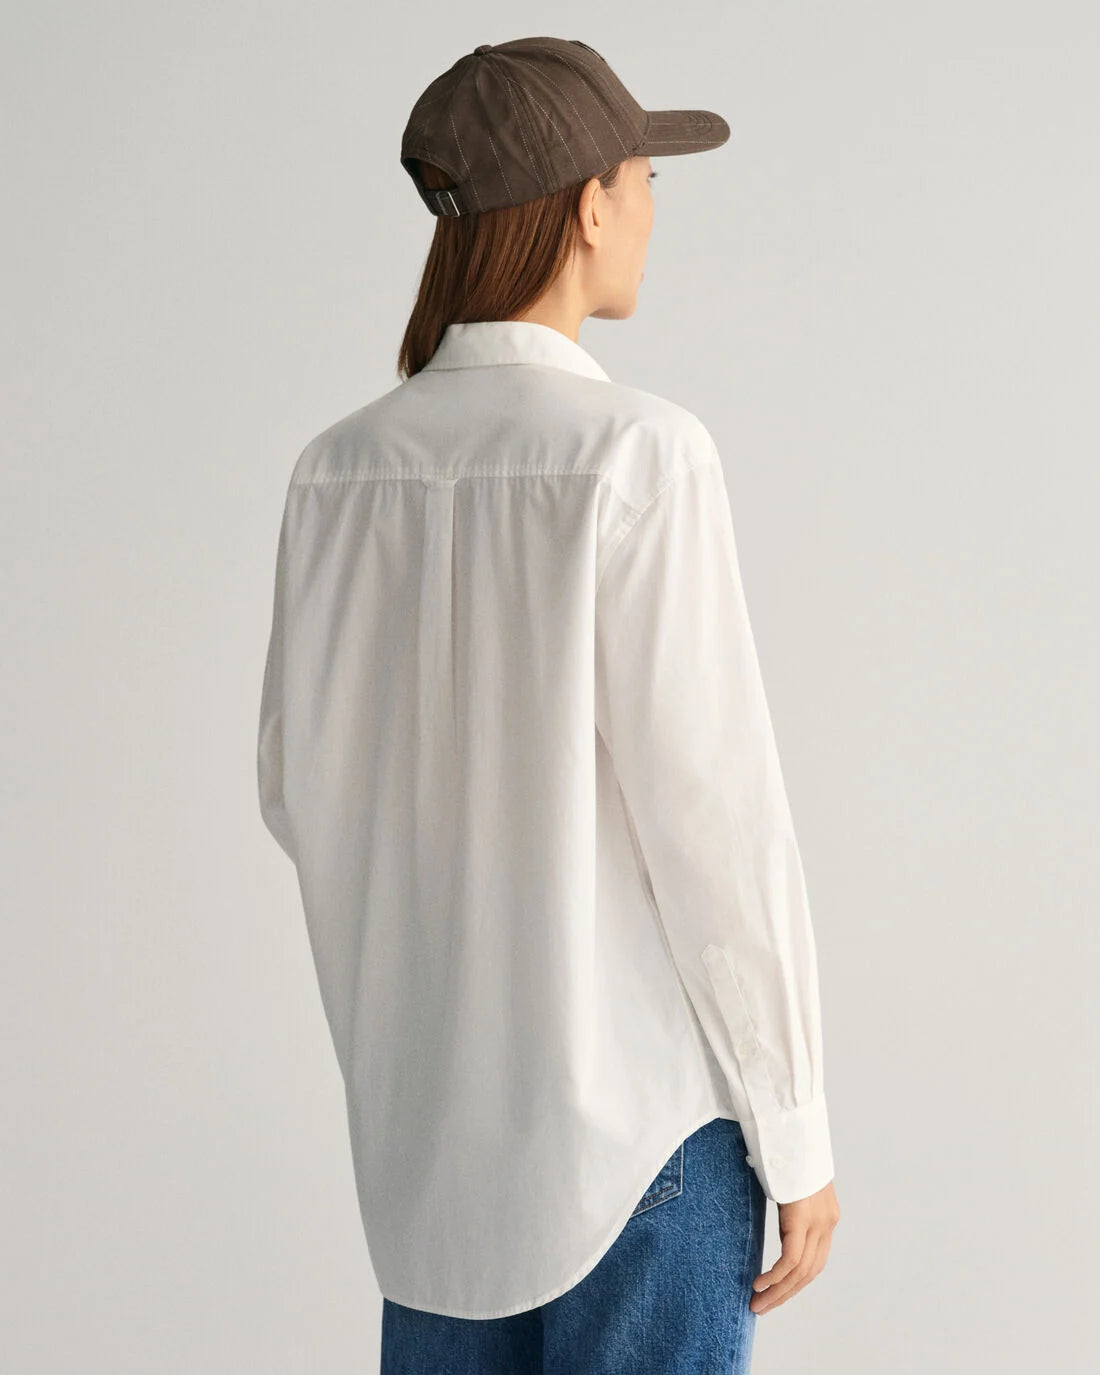 Pure White Relaxed Fit Poplin Shirt